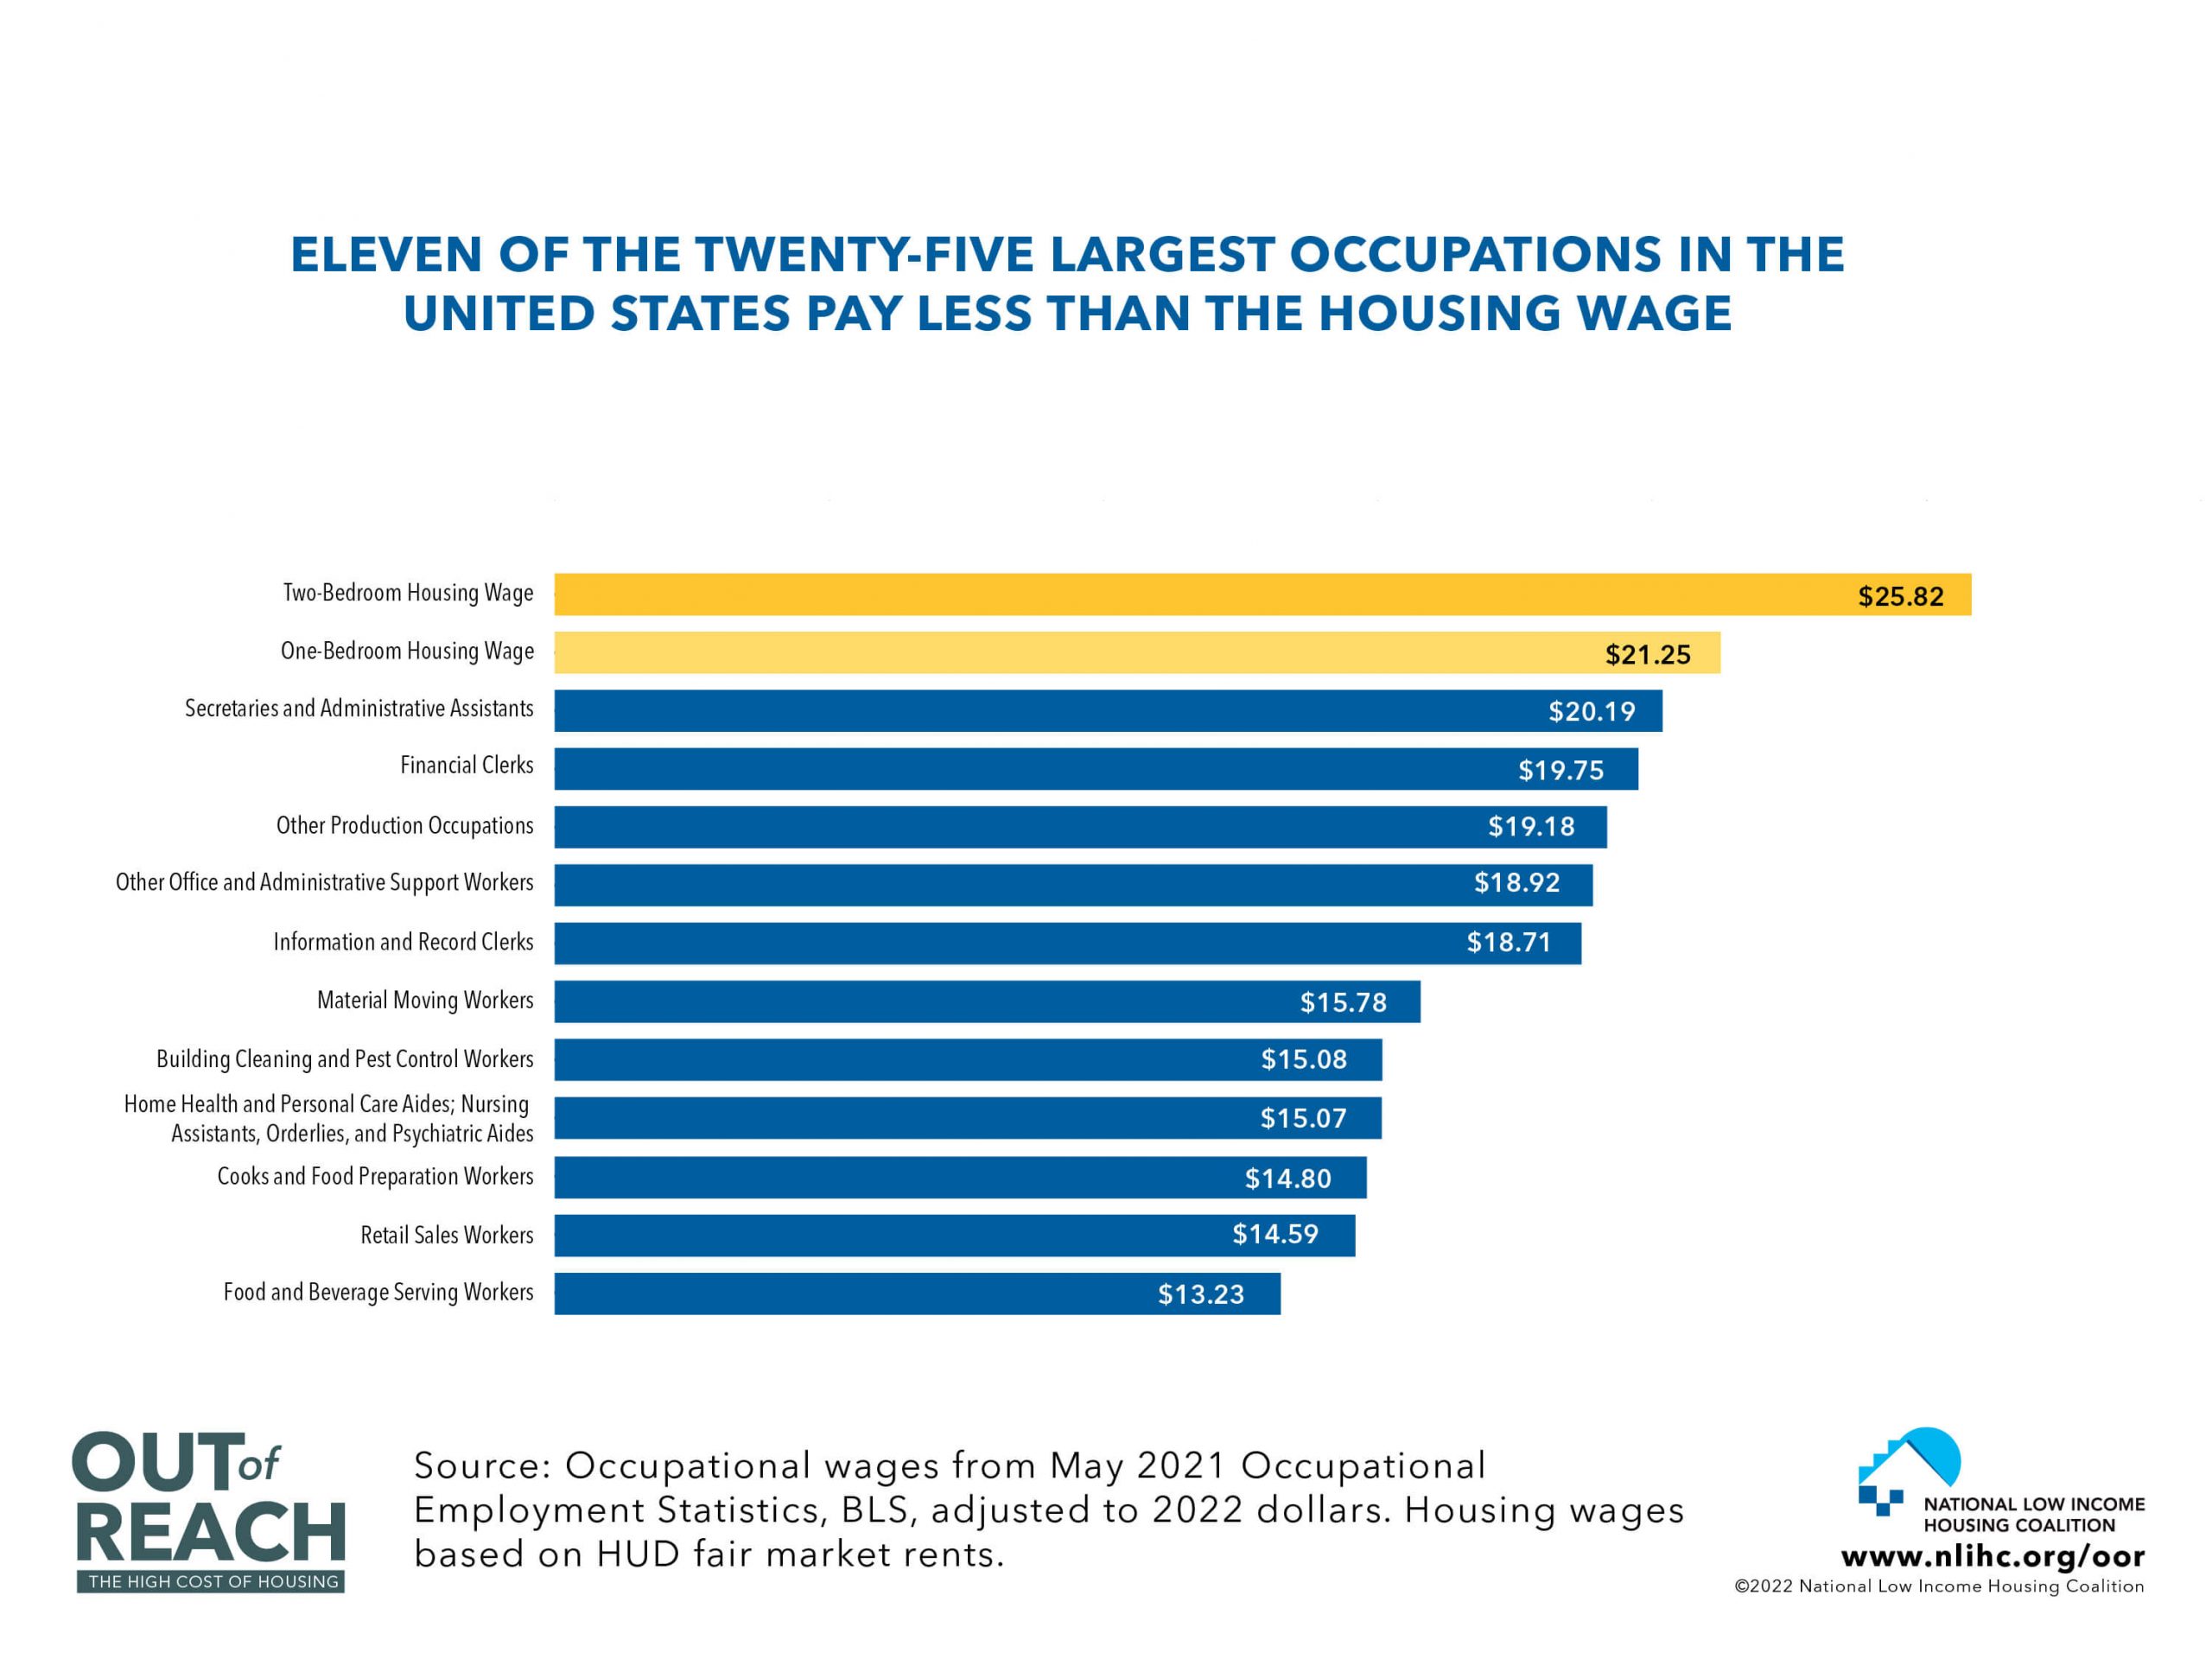 Graph shows jobs that pay less than housing wage in U.S.